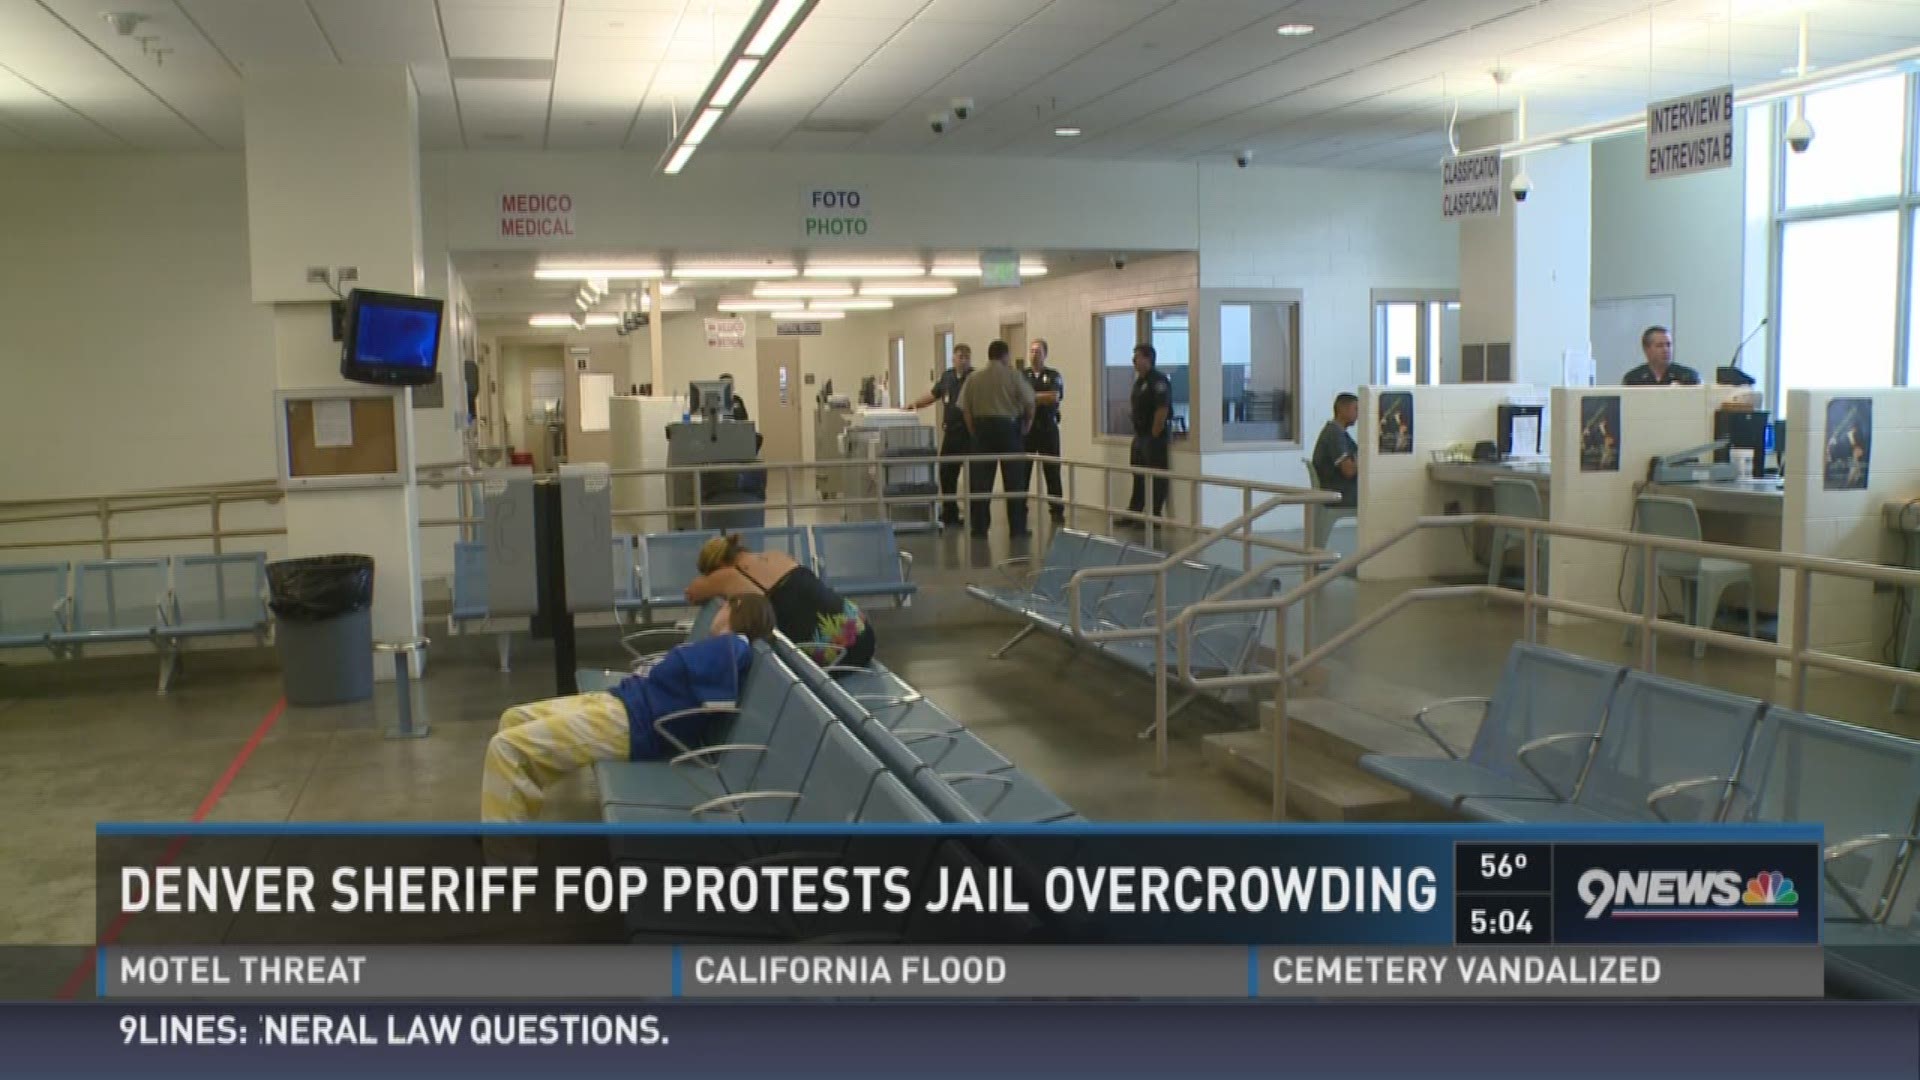 FOP protests overcrowding at Denver jail, says it's unsafe for inmates